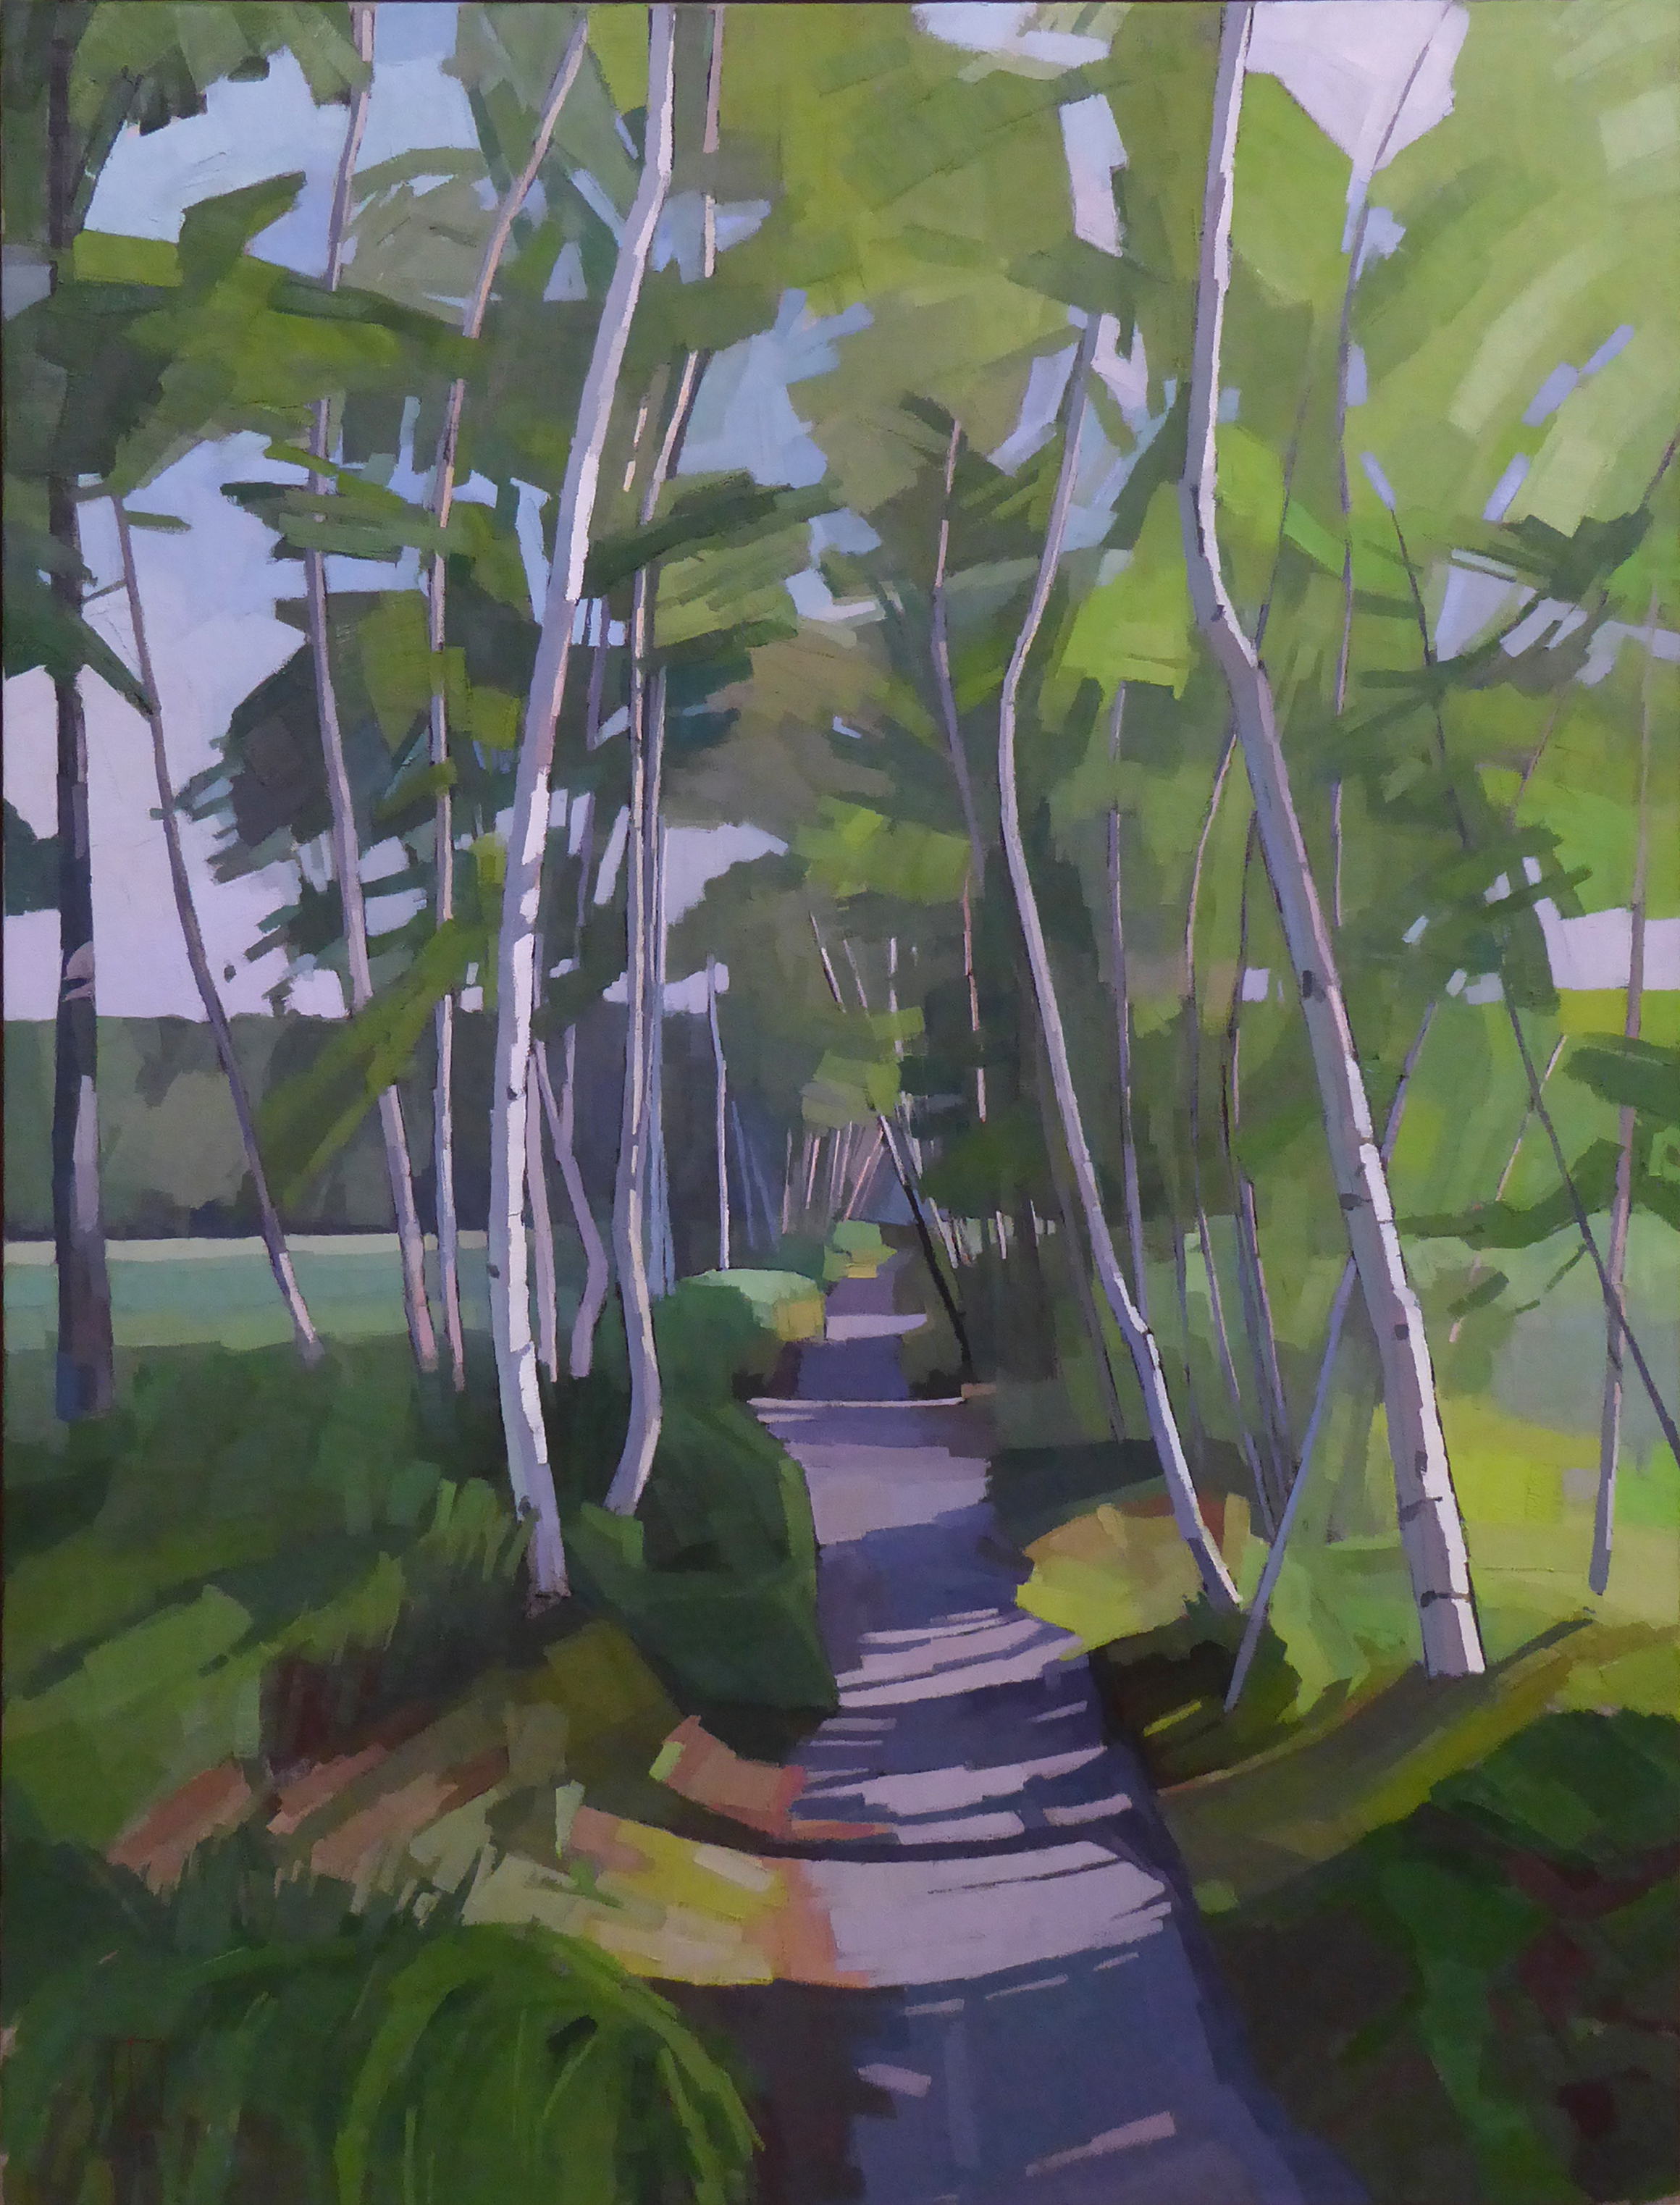   Path in the Sun  30 x 40 oil on linen  sold   NW Barrett Gallery  